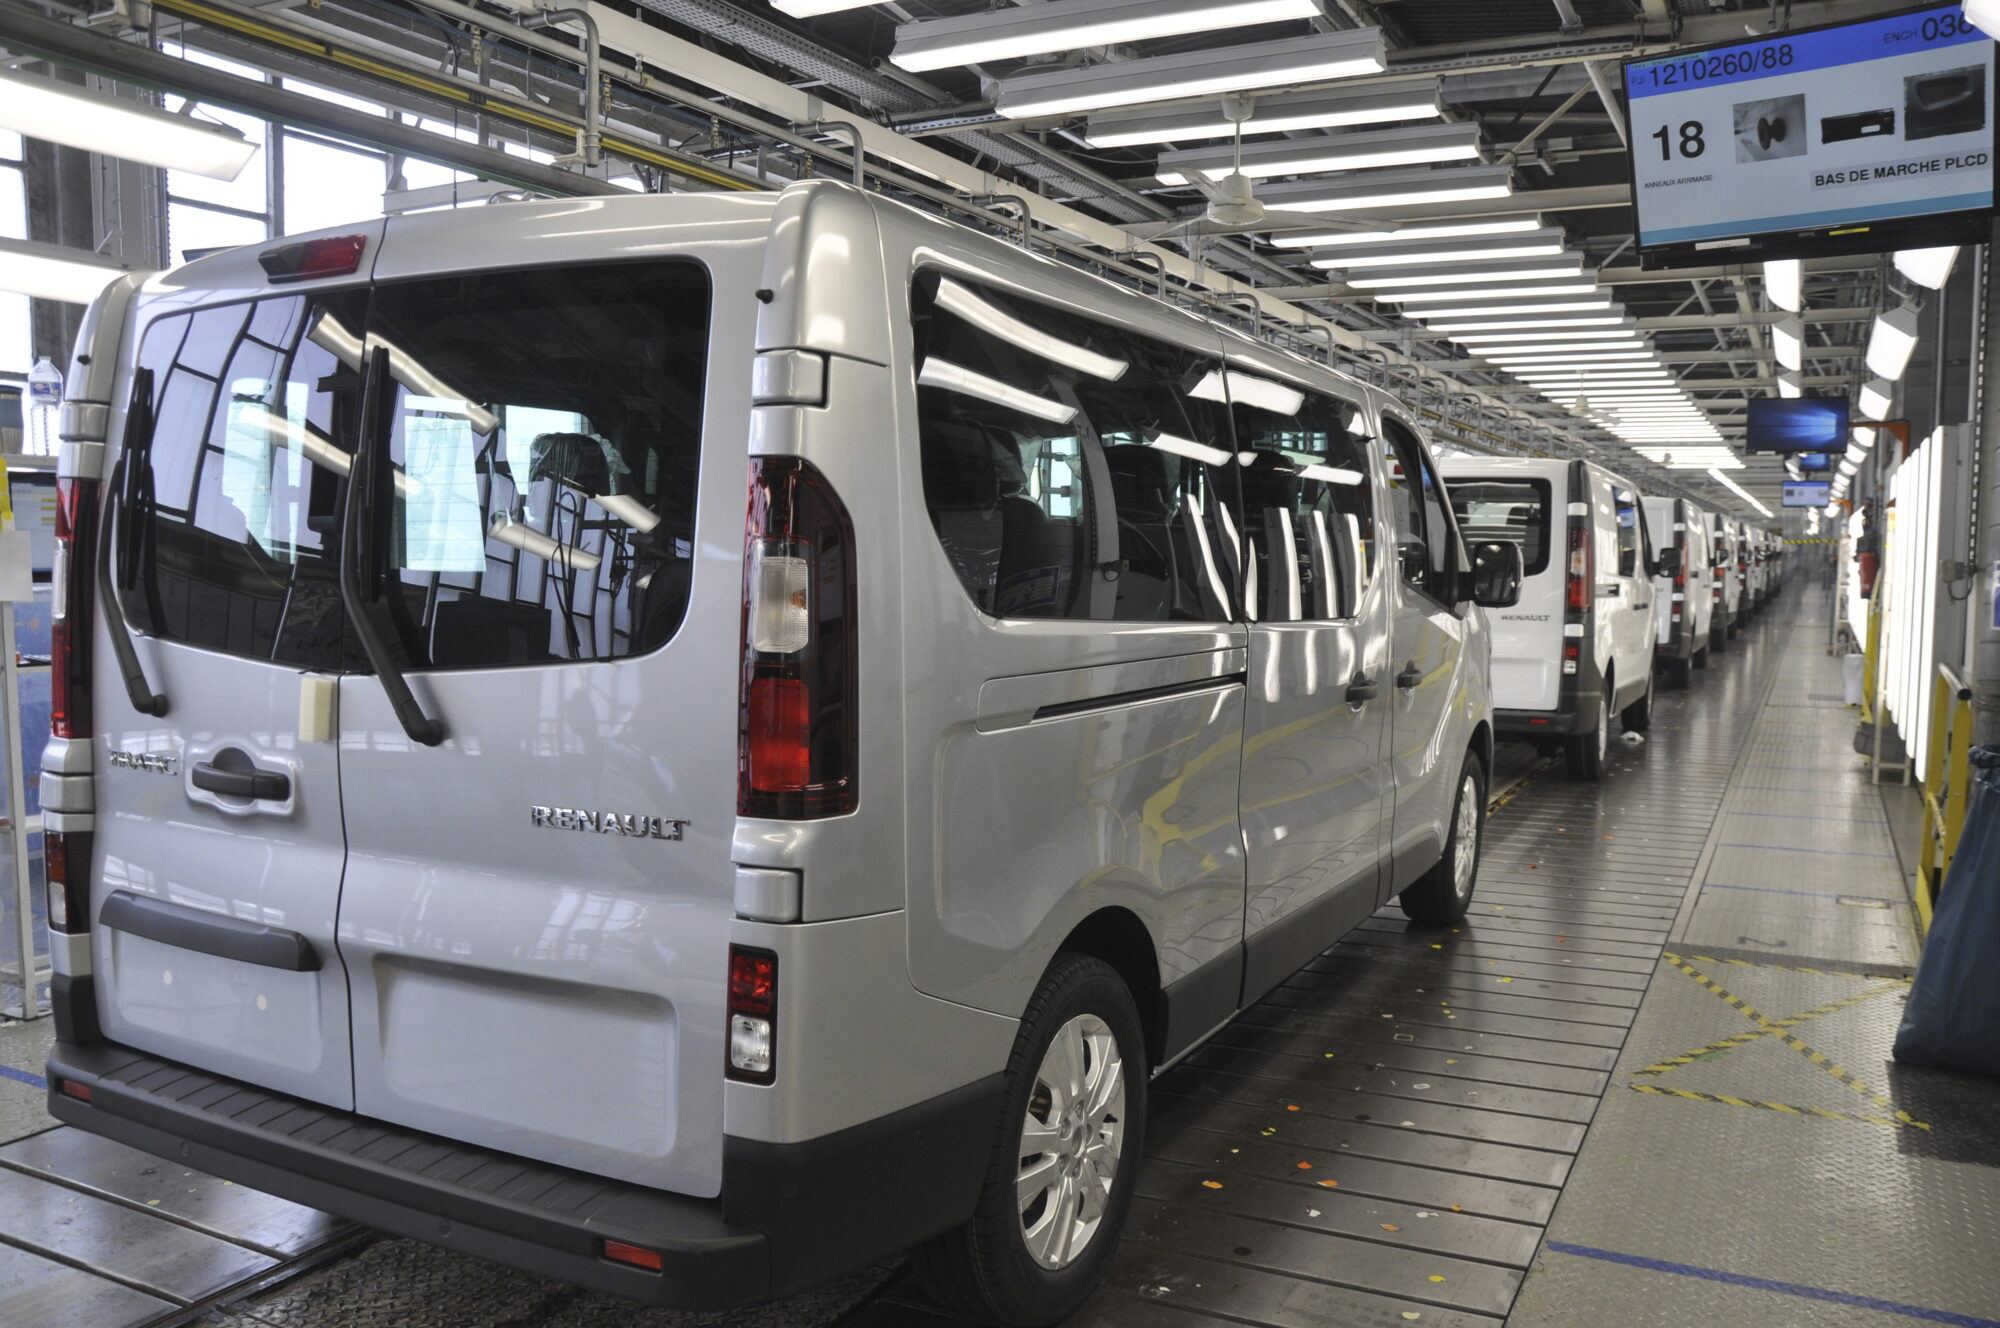 2021 - New Renault Trafic - Manufacturing